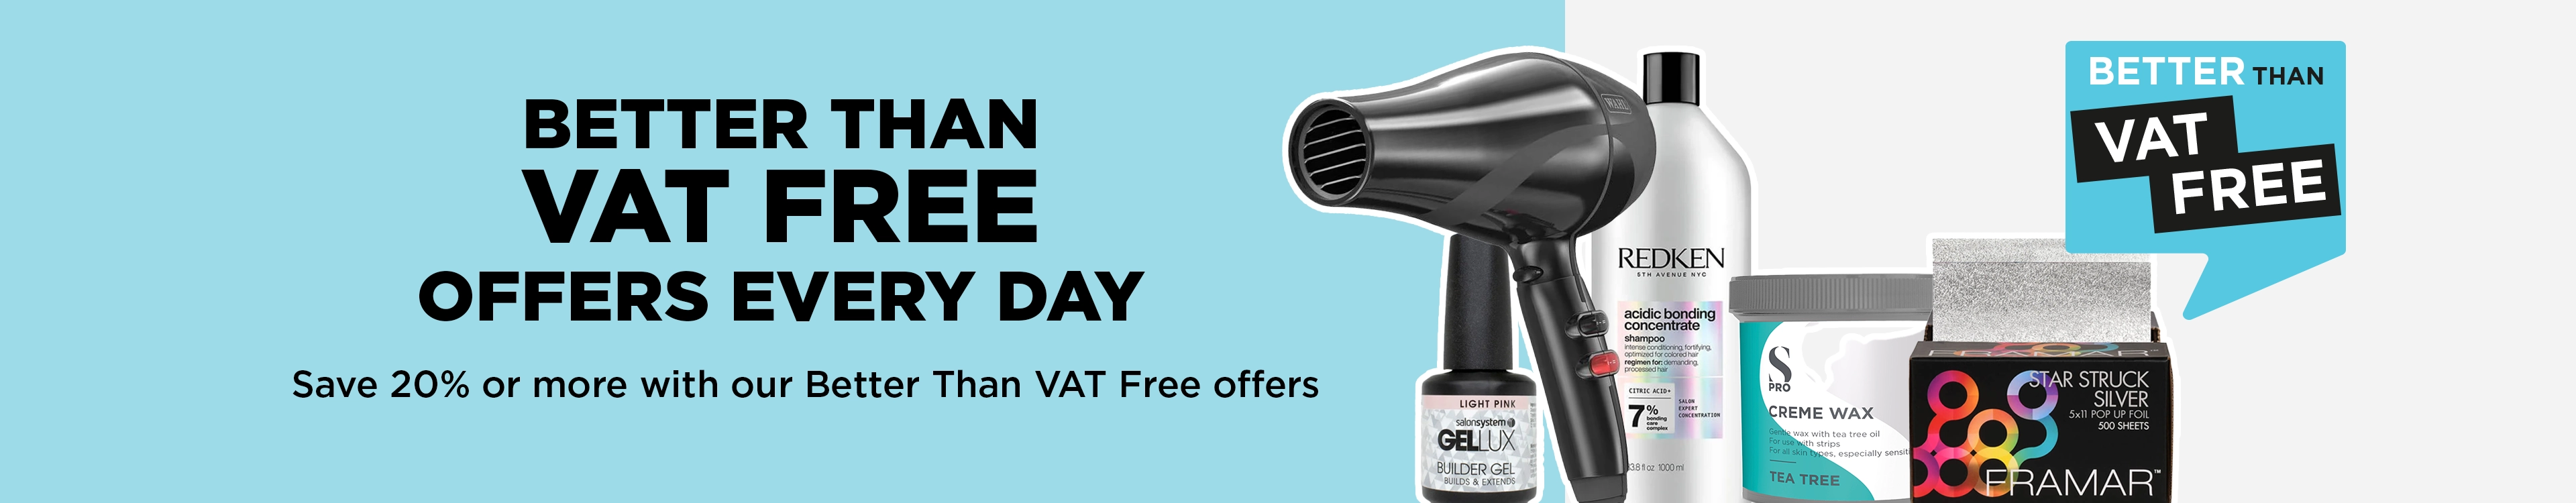 Save when you need to with our Better Than VAT Free Offers.